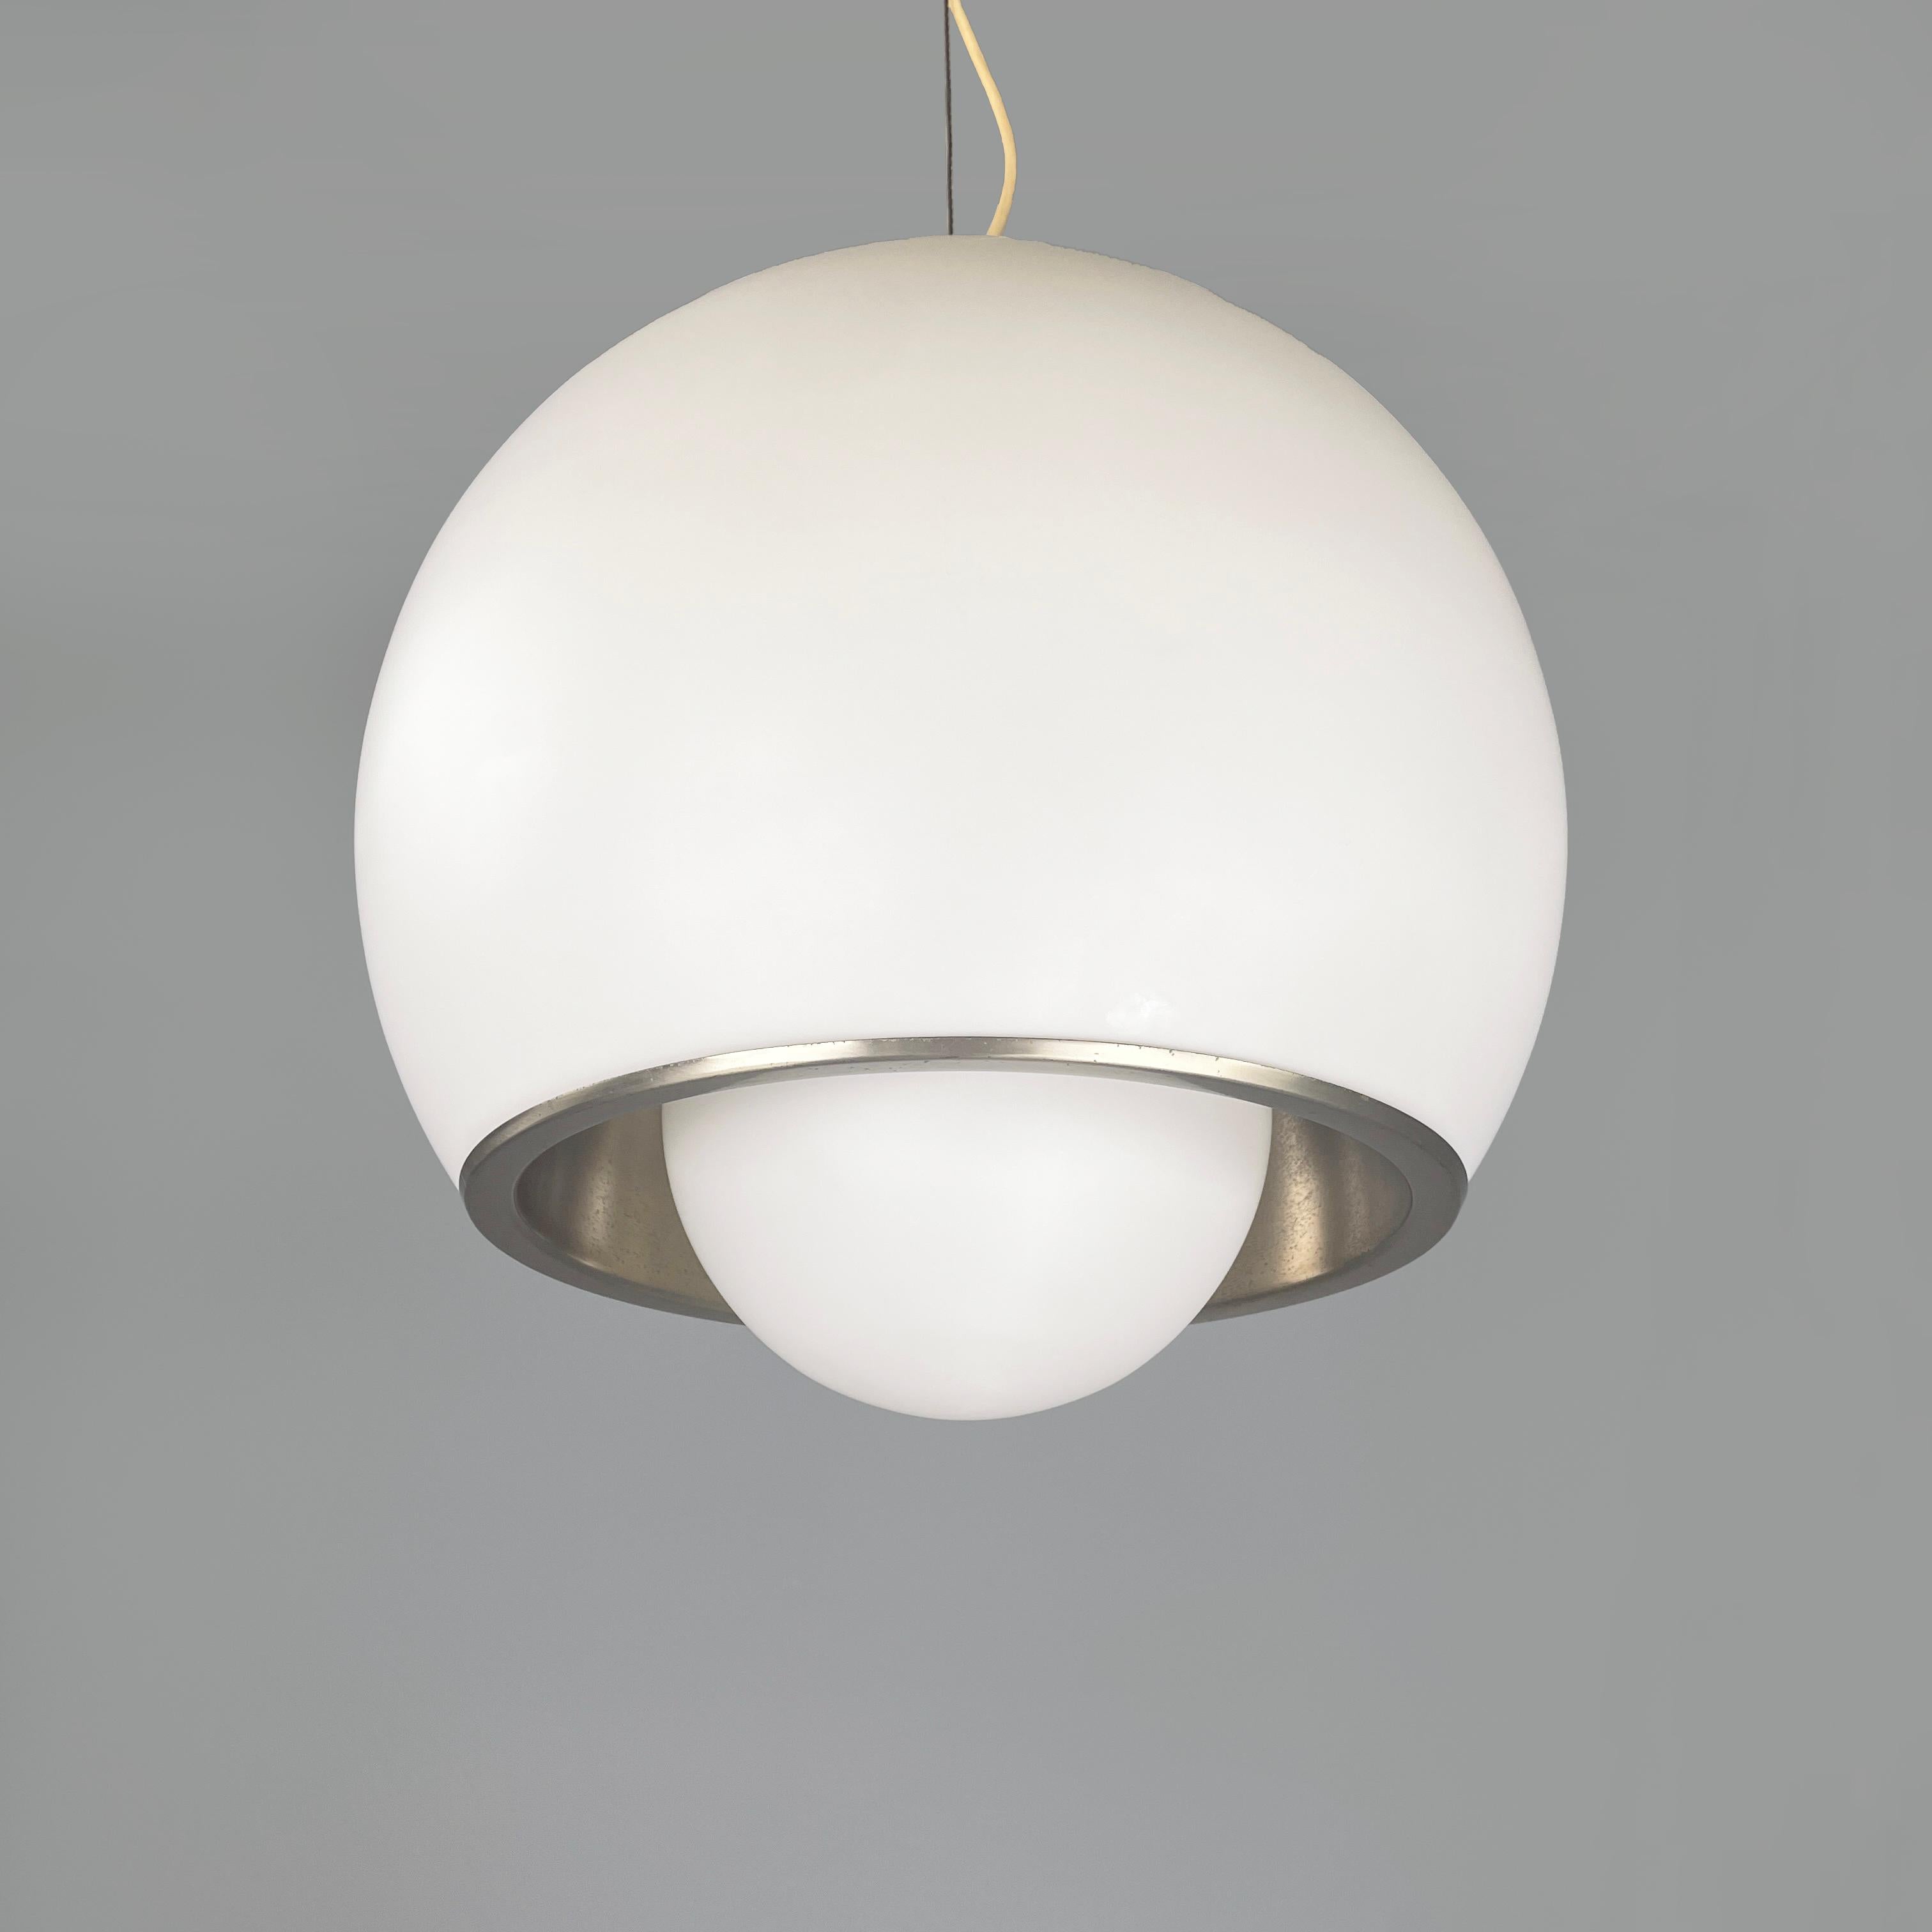 Italian space age Opaline glass steel chandelier by Fontana Arte, 1940s
Chandelier in matte opaline glass and steel. The dome diffuser has a chromed steel band in the center and an opaline glass sphere underneath. Inside the diffuser there are 7 E27